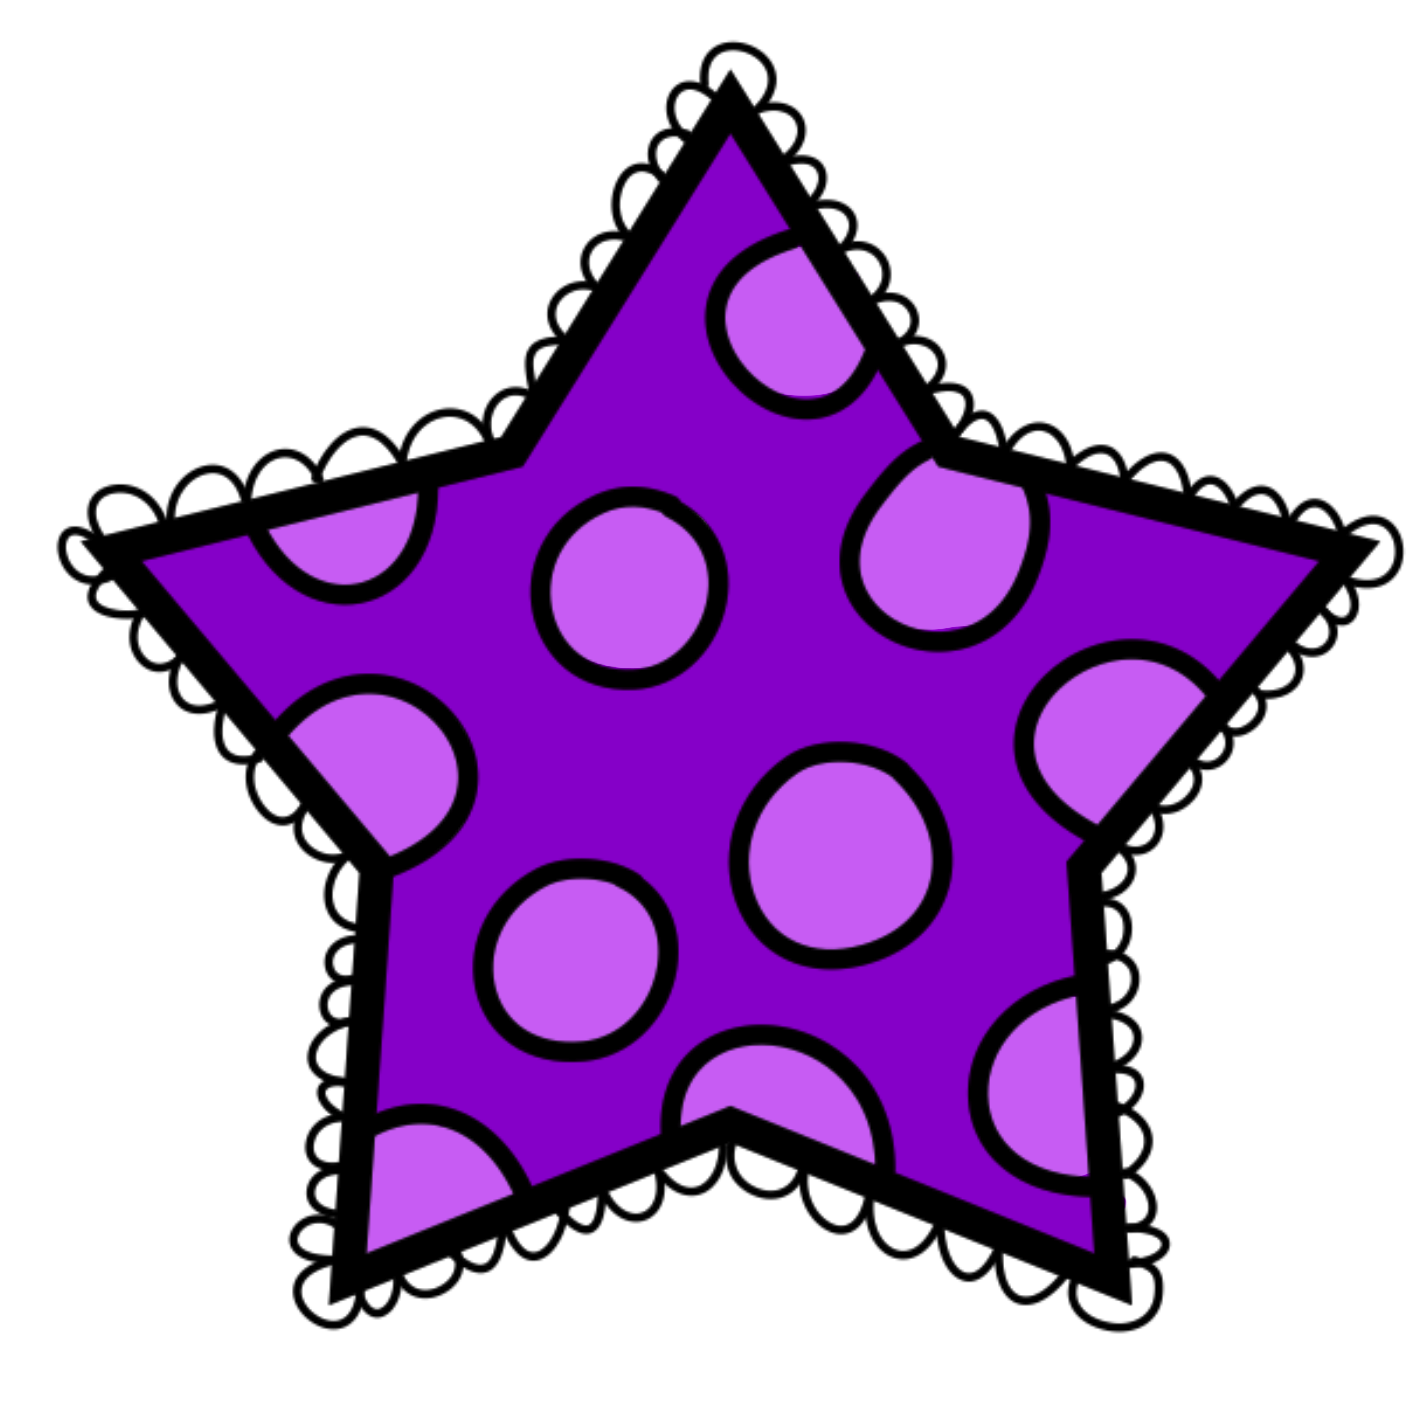 Clipart stars polka dot. Pencil and in color